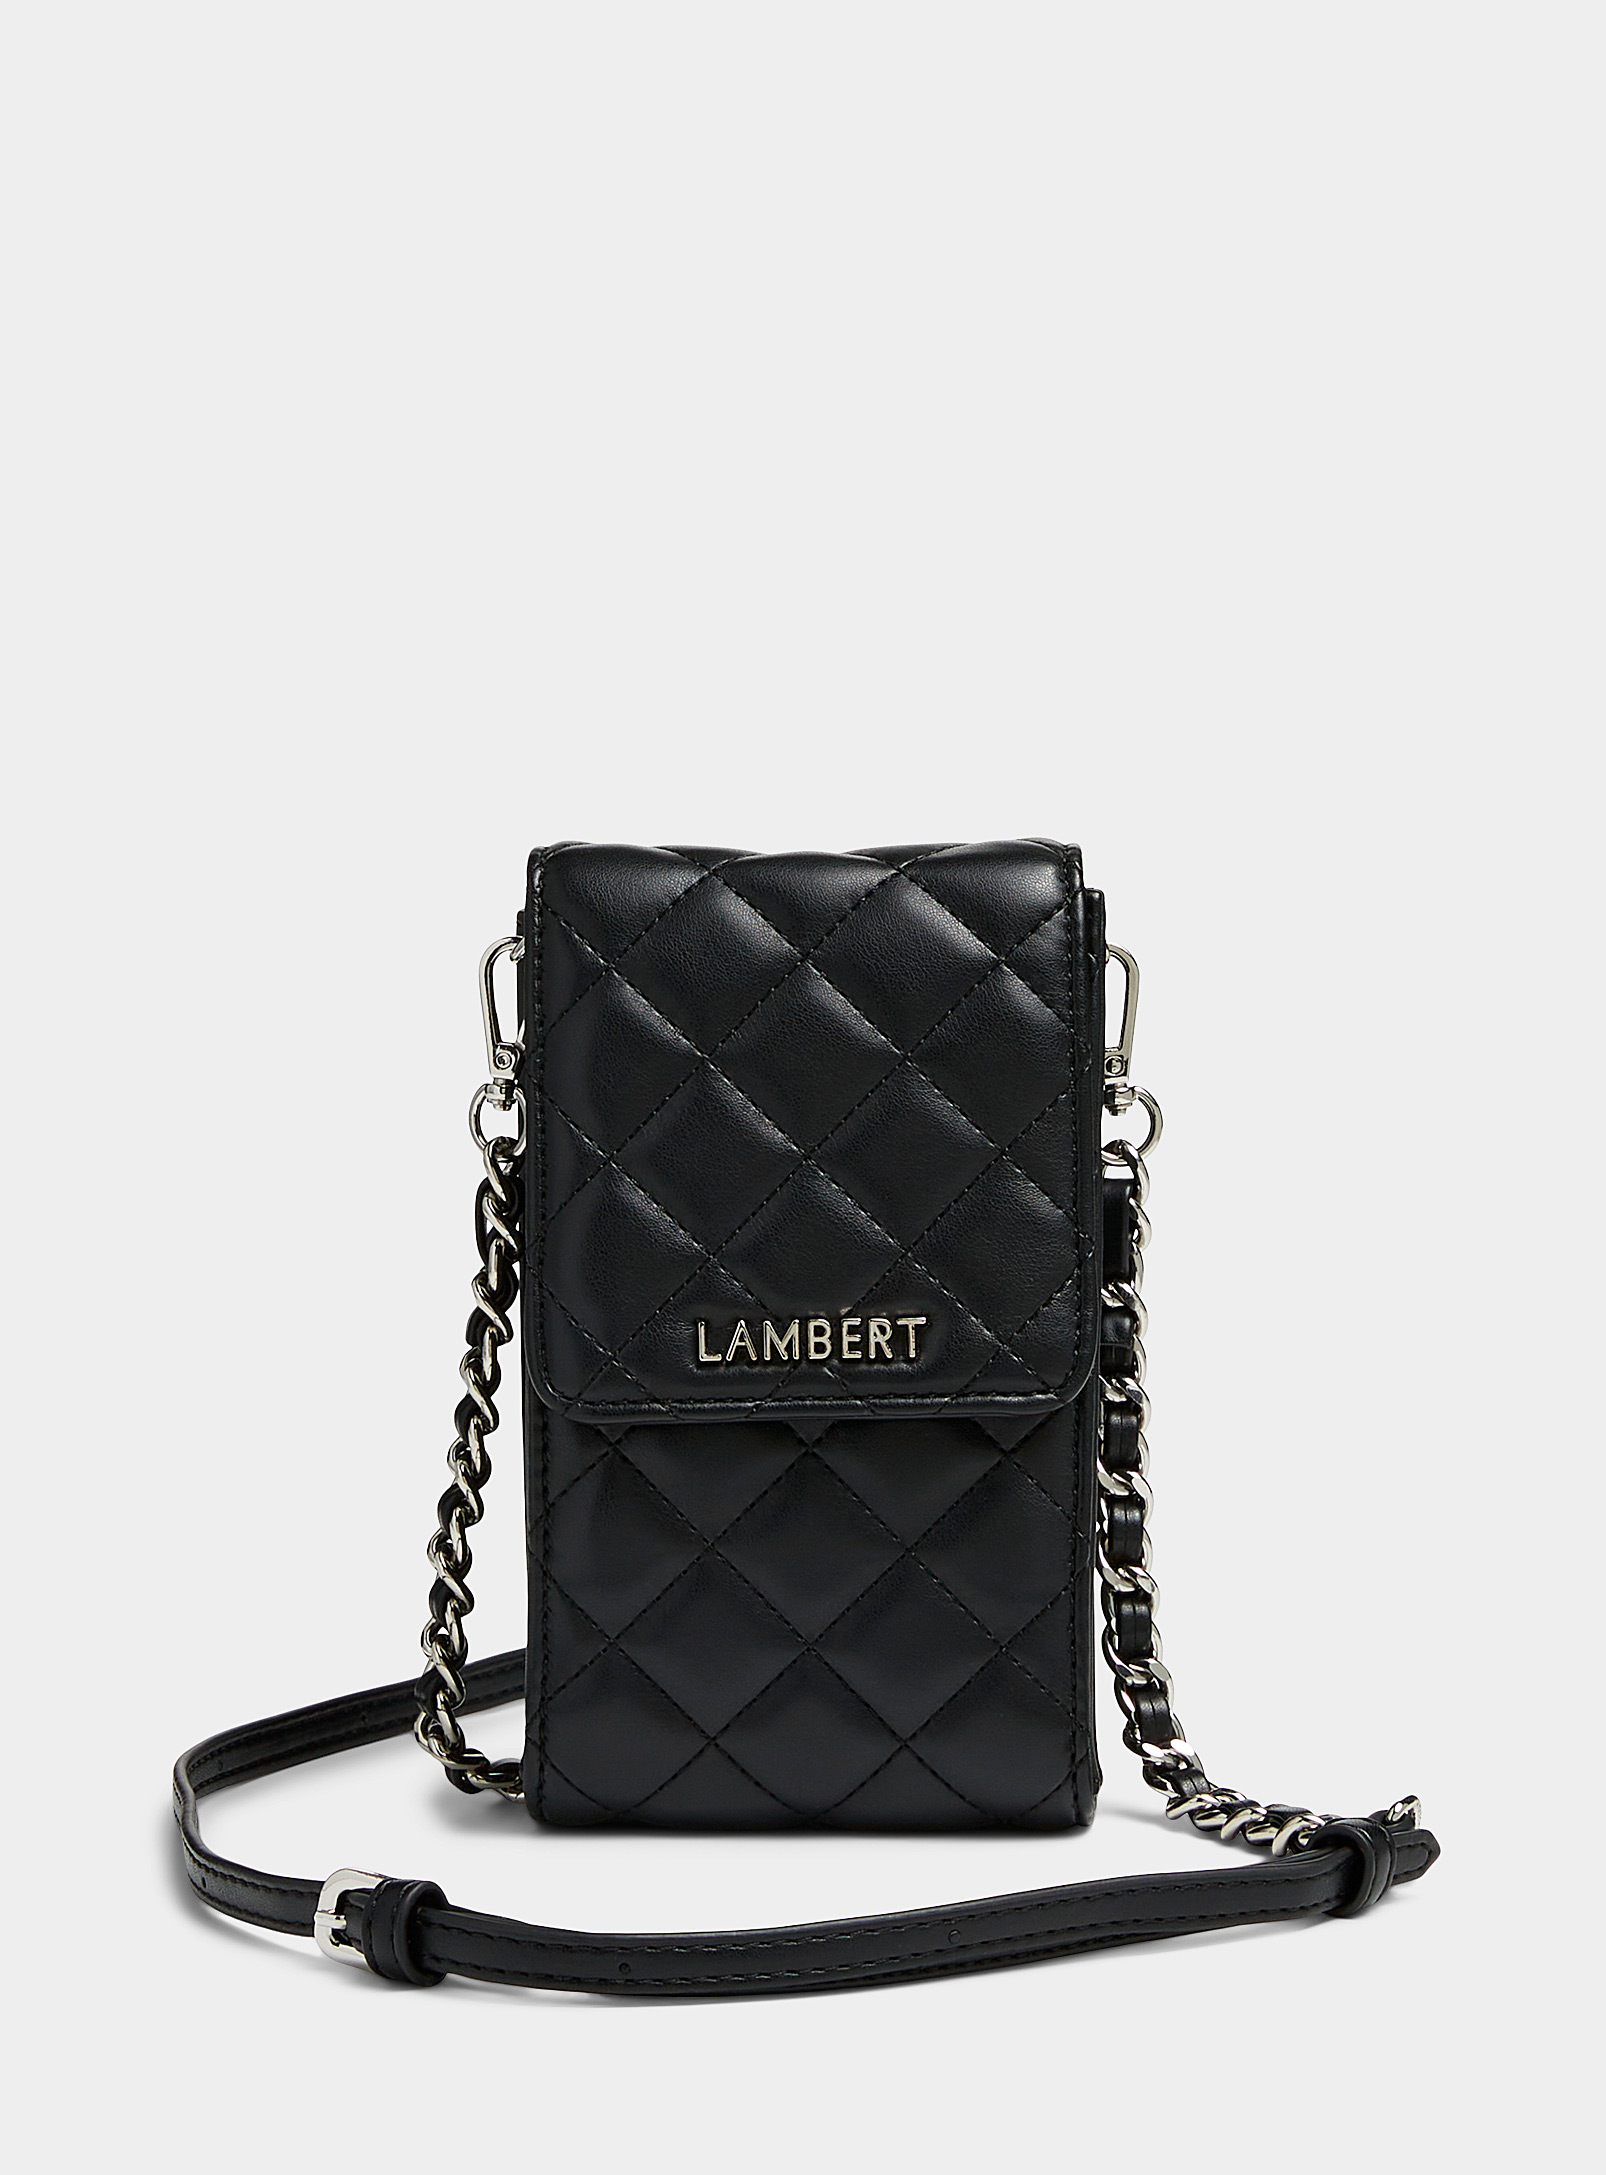 Lambert Delilah Topstitched Phone Clutch In Black